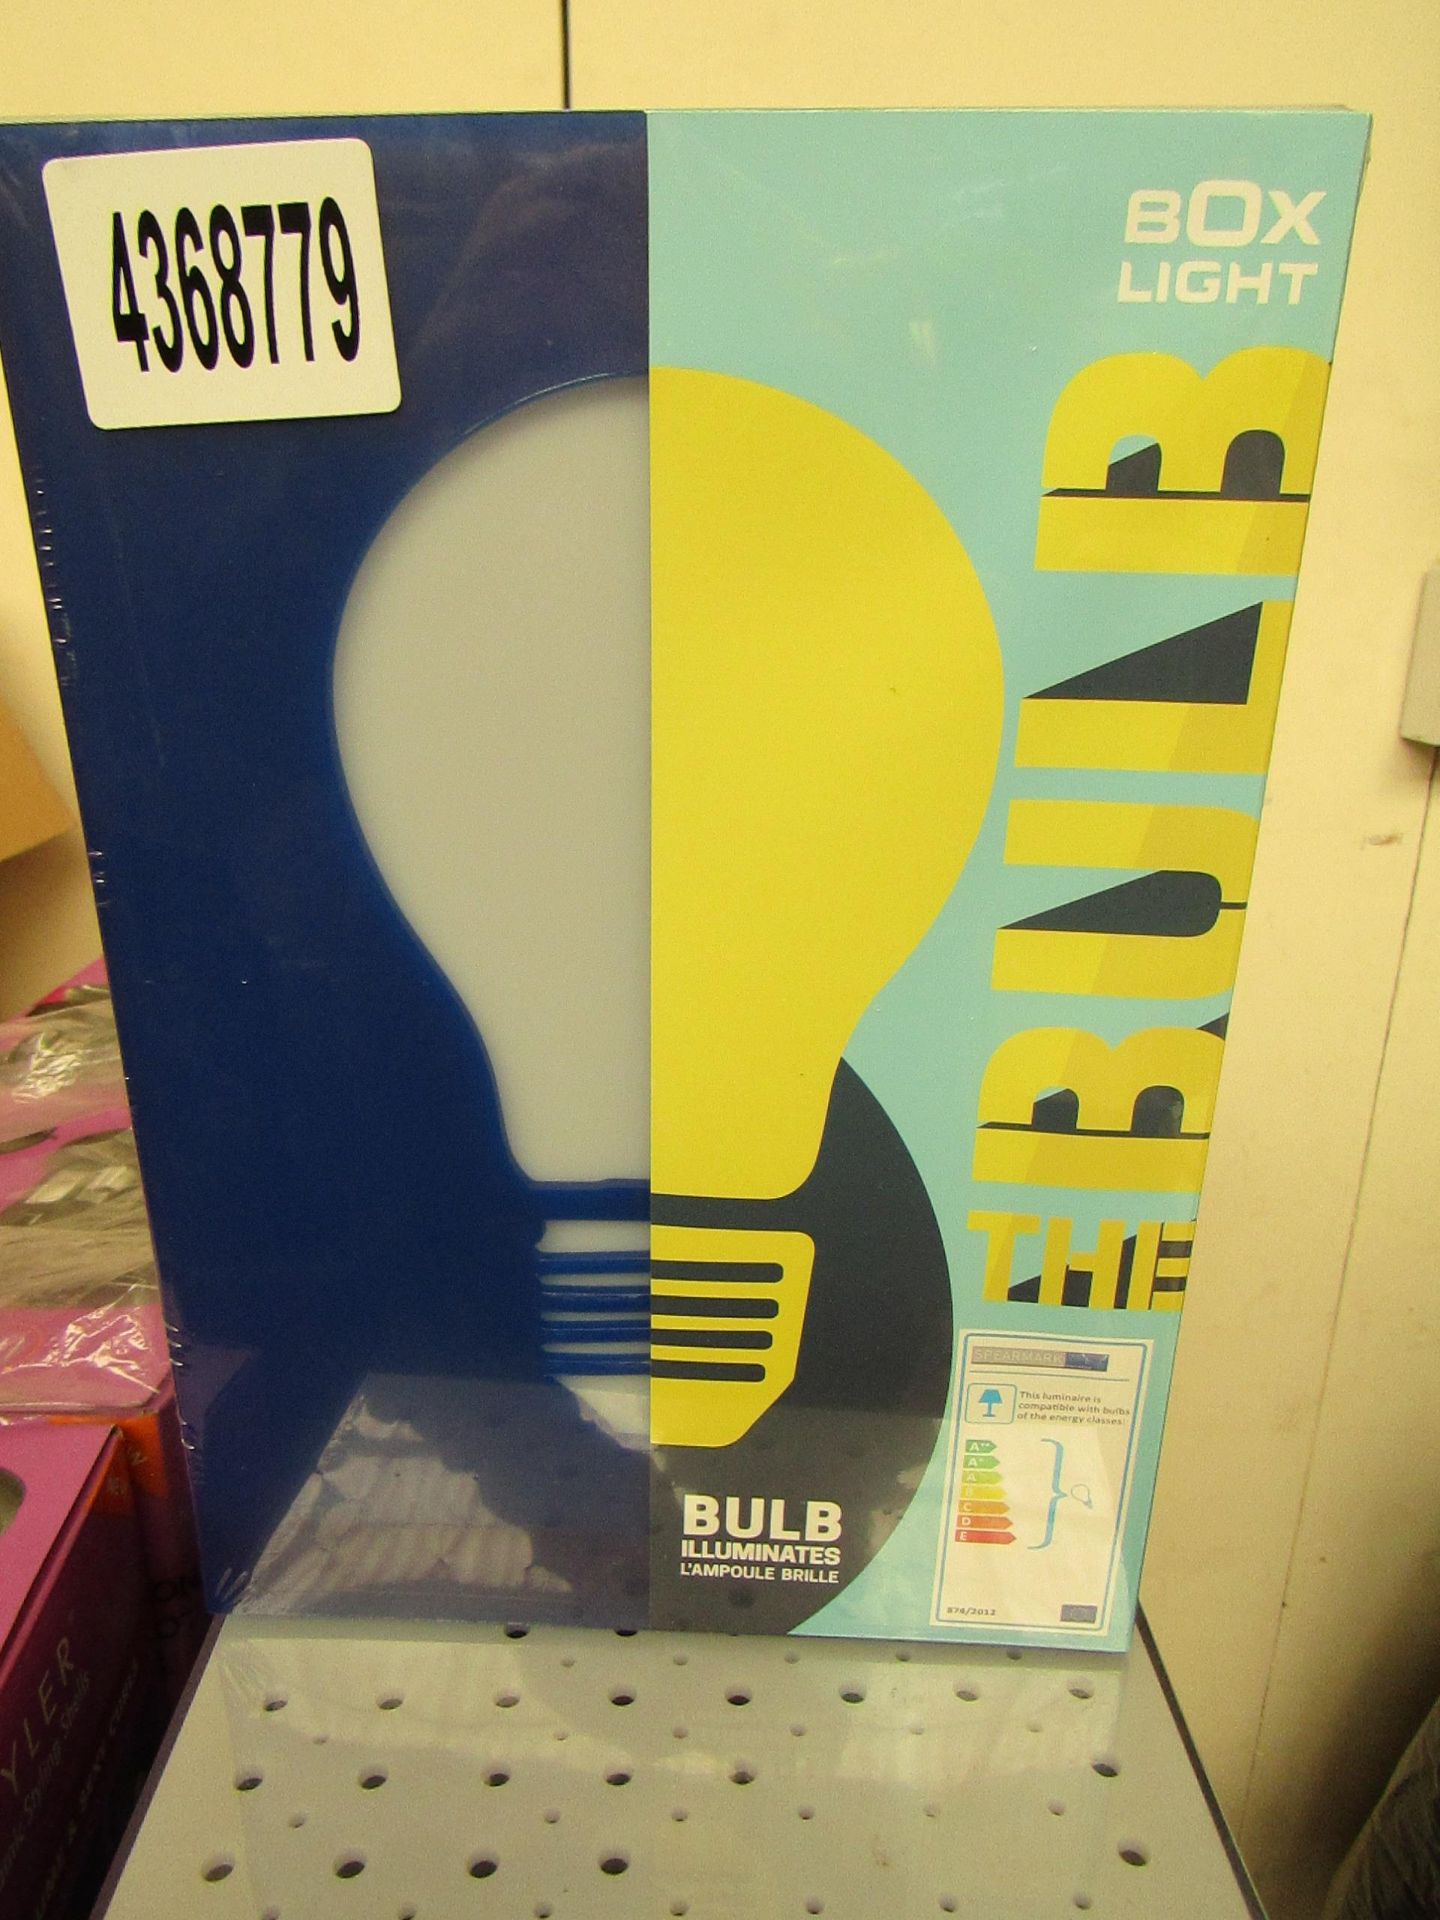 6x The Bulb - Box Night Light - All New & Packaged.